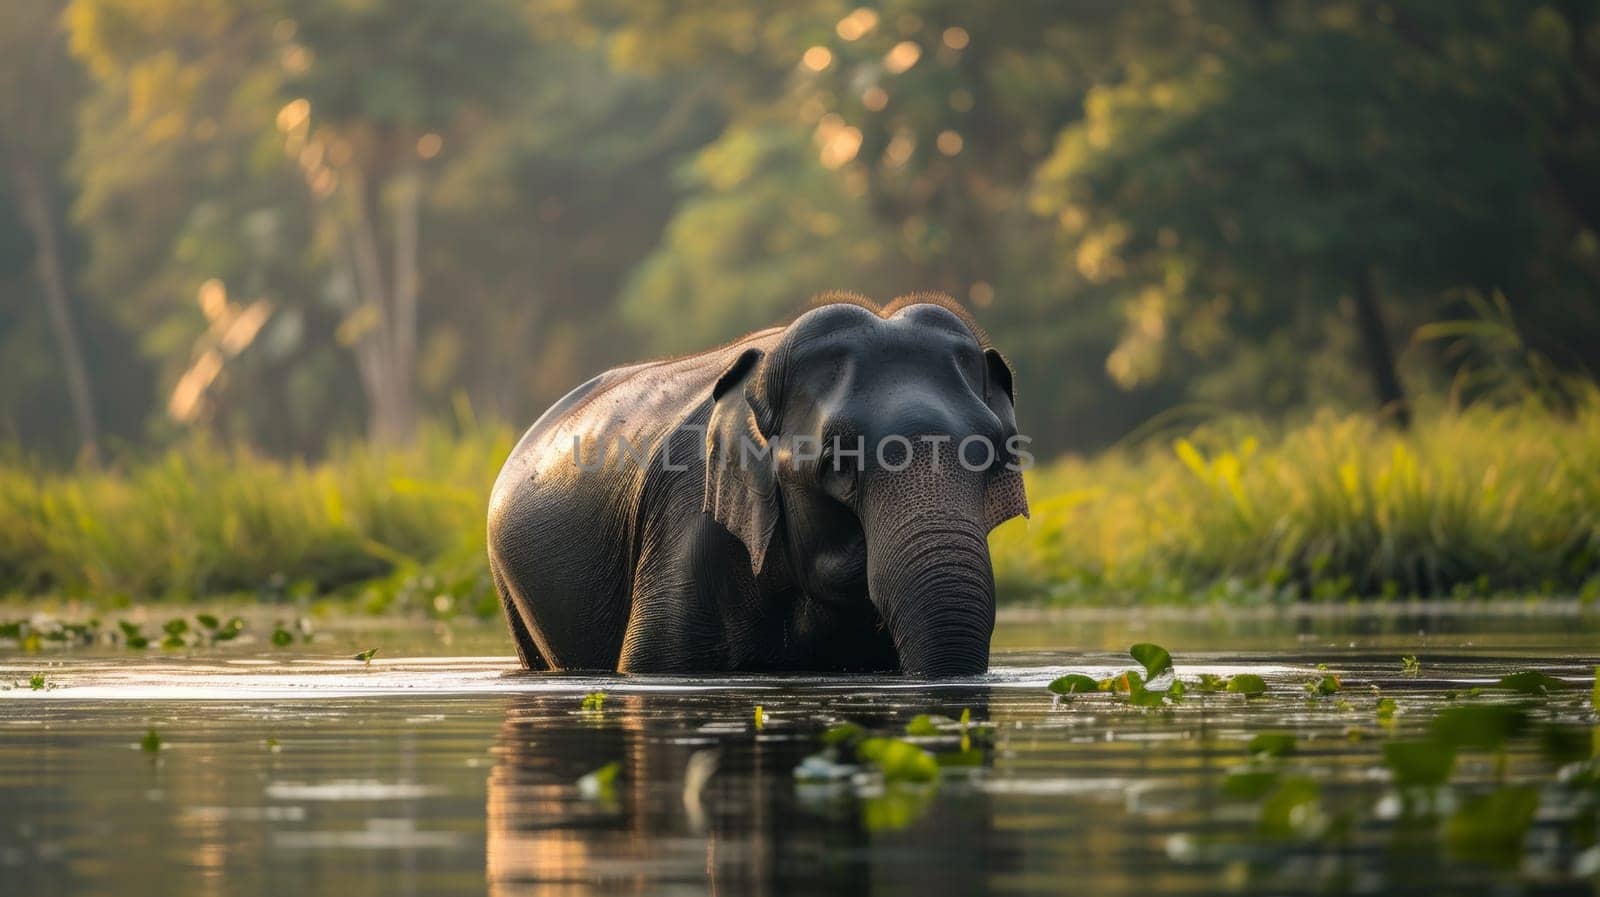 An elephant is walking in the water with grass and trees behind it